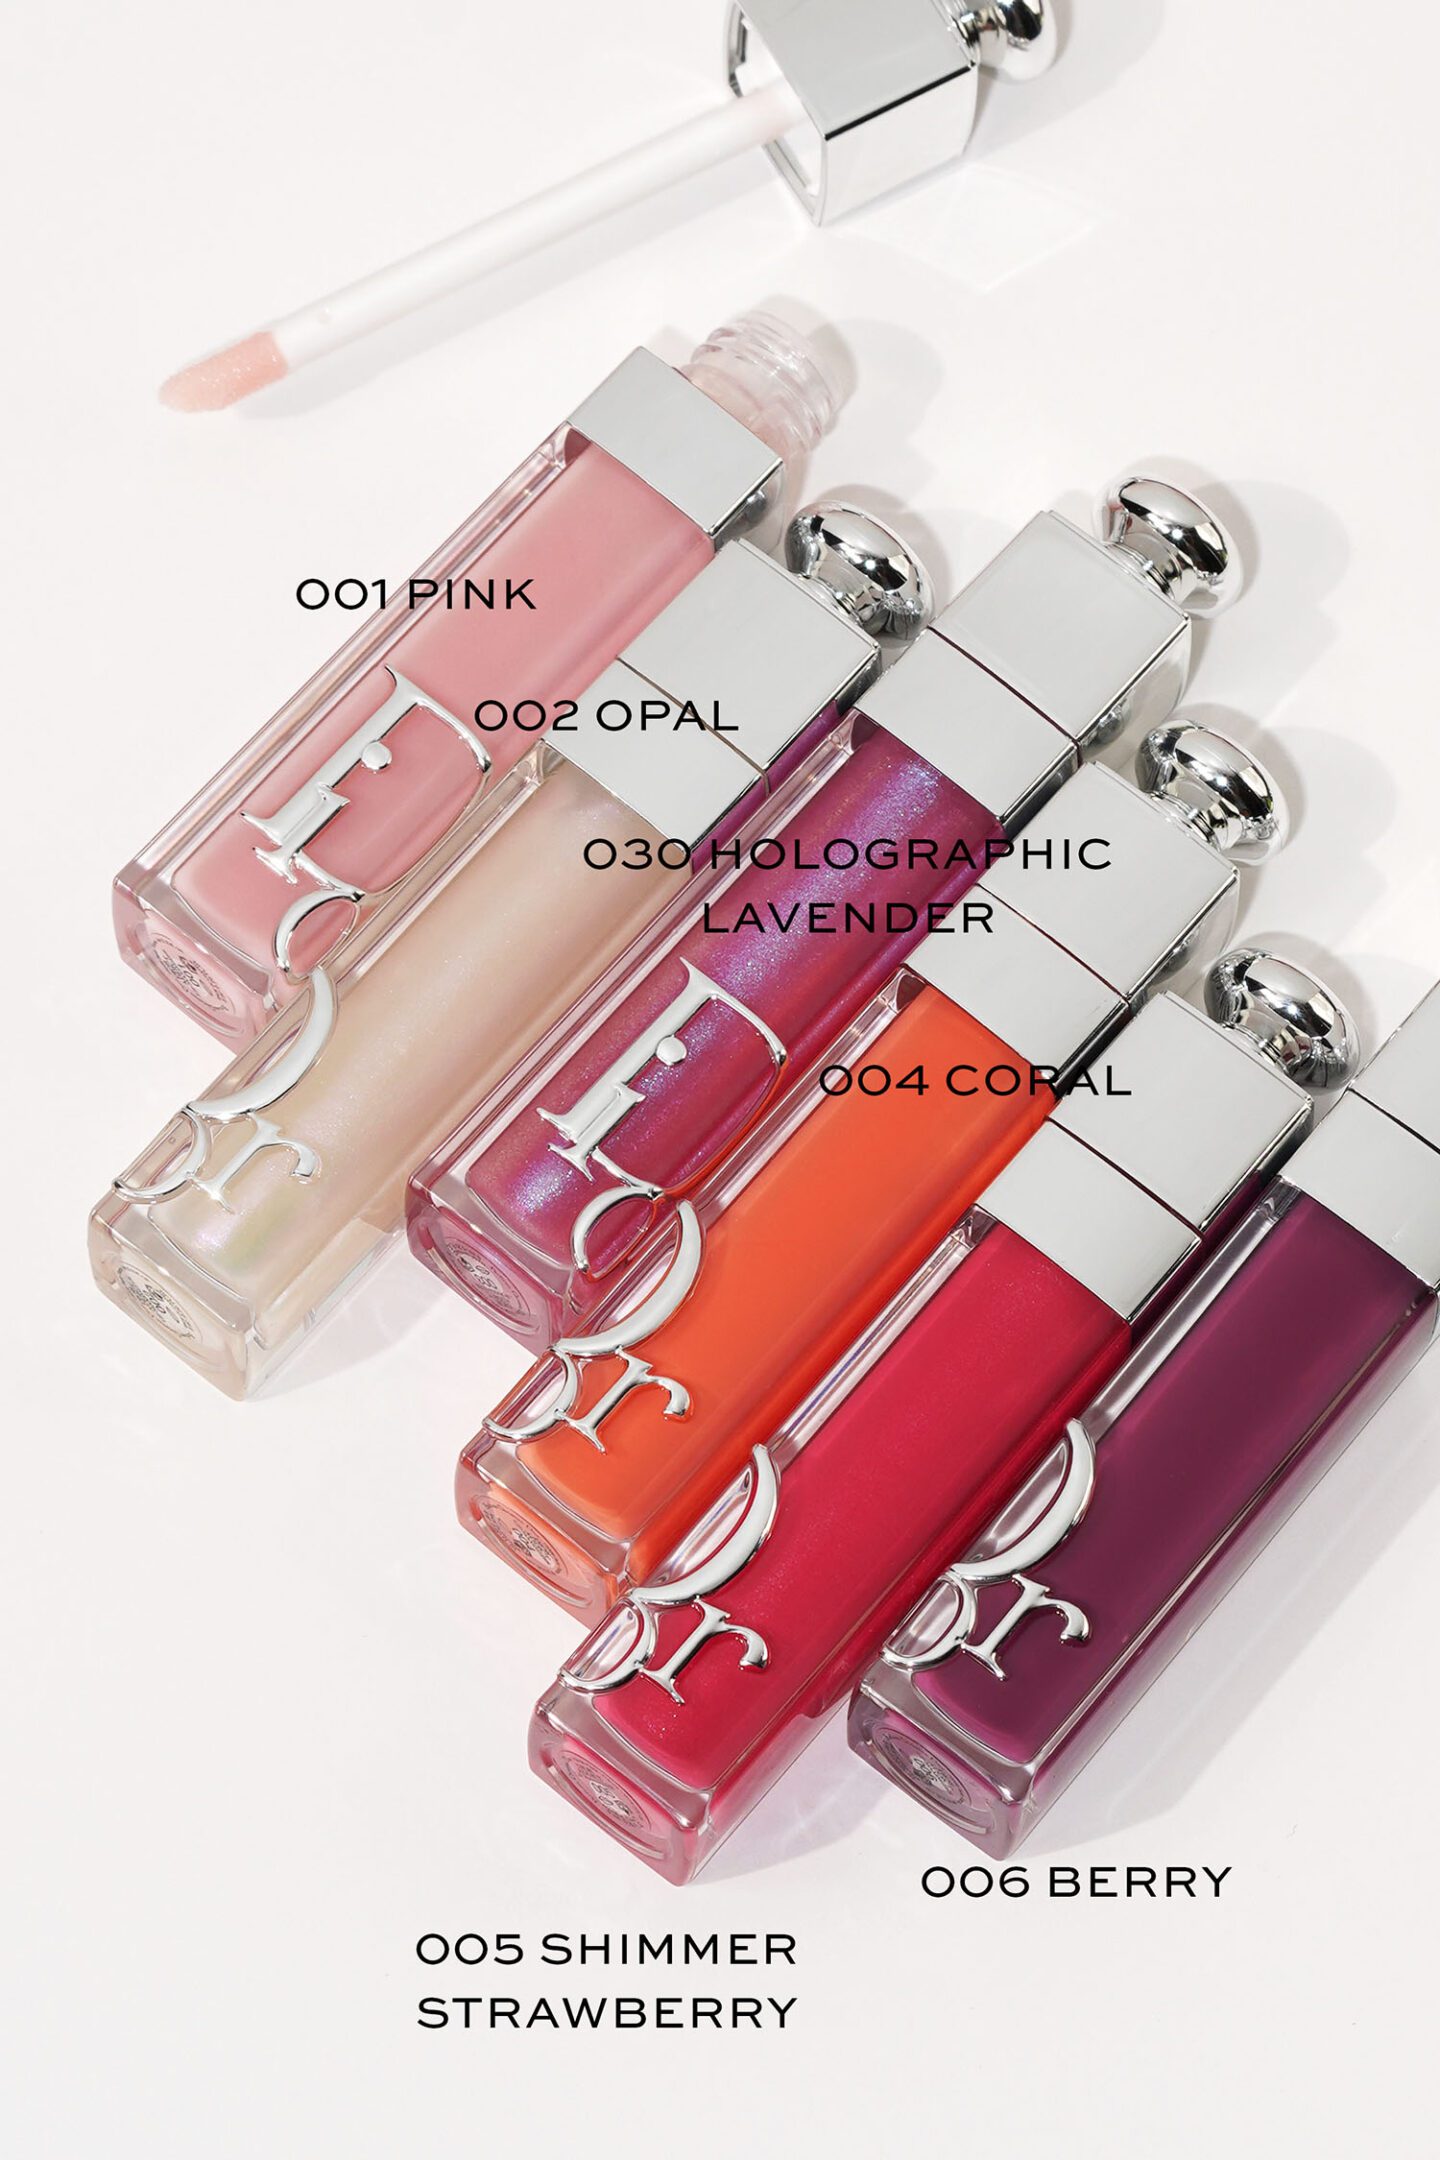 Dior Addict Lip Maximizers in Pink, Opal, Holographic Lavender, Coral, Raspberry and Berry